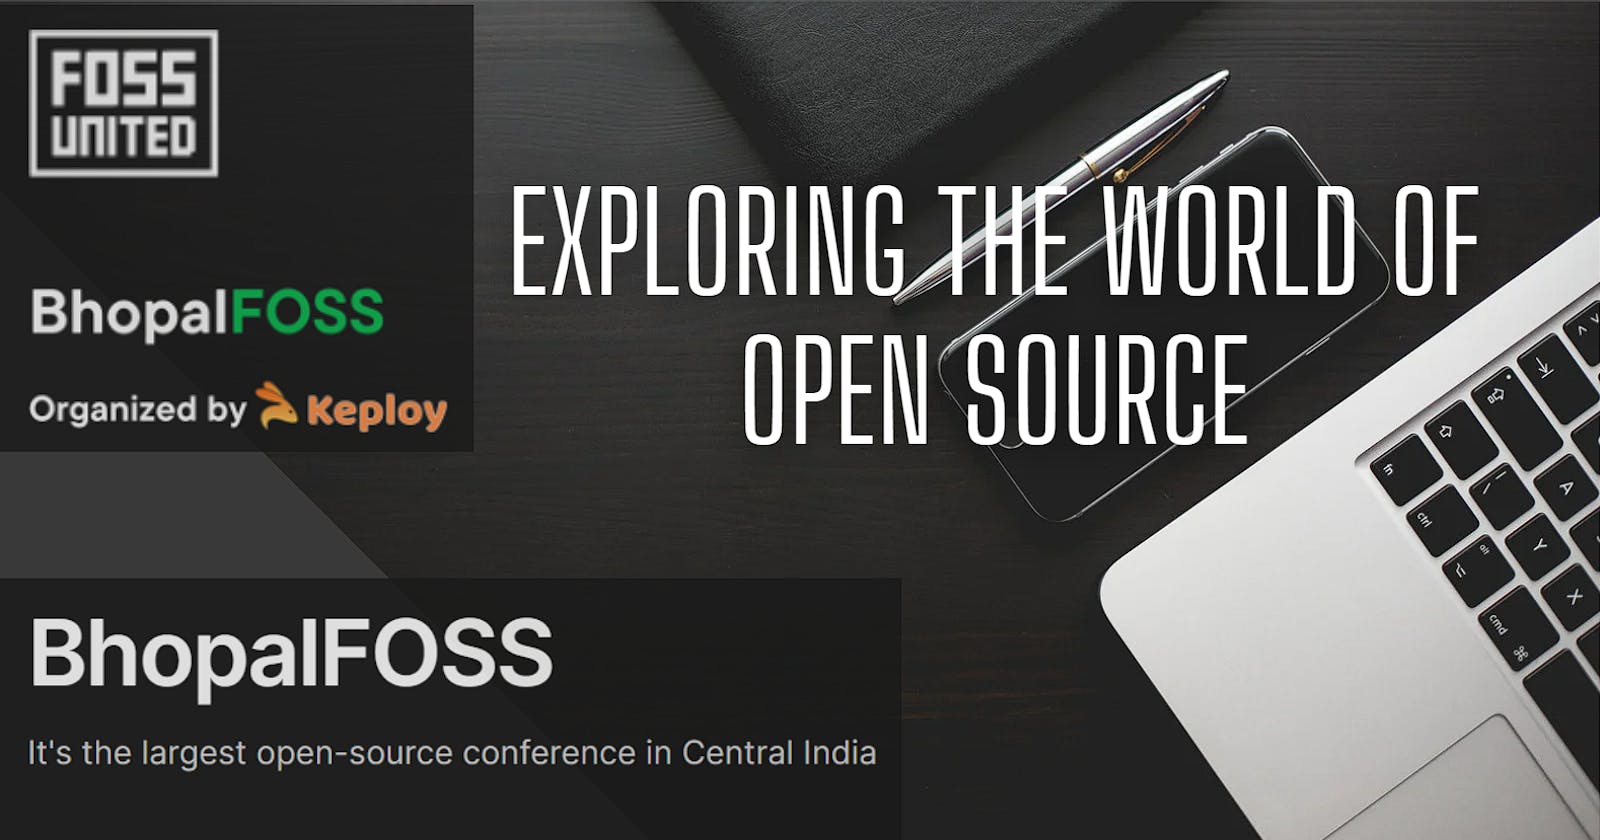 Exploring the World of Open Source: My First Experience at the Bhopal FOSS,  a FOSS United India Tour Open-Source Conference